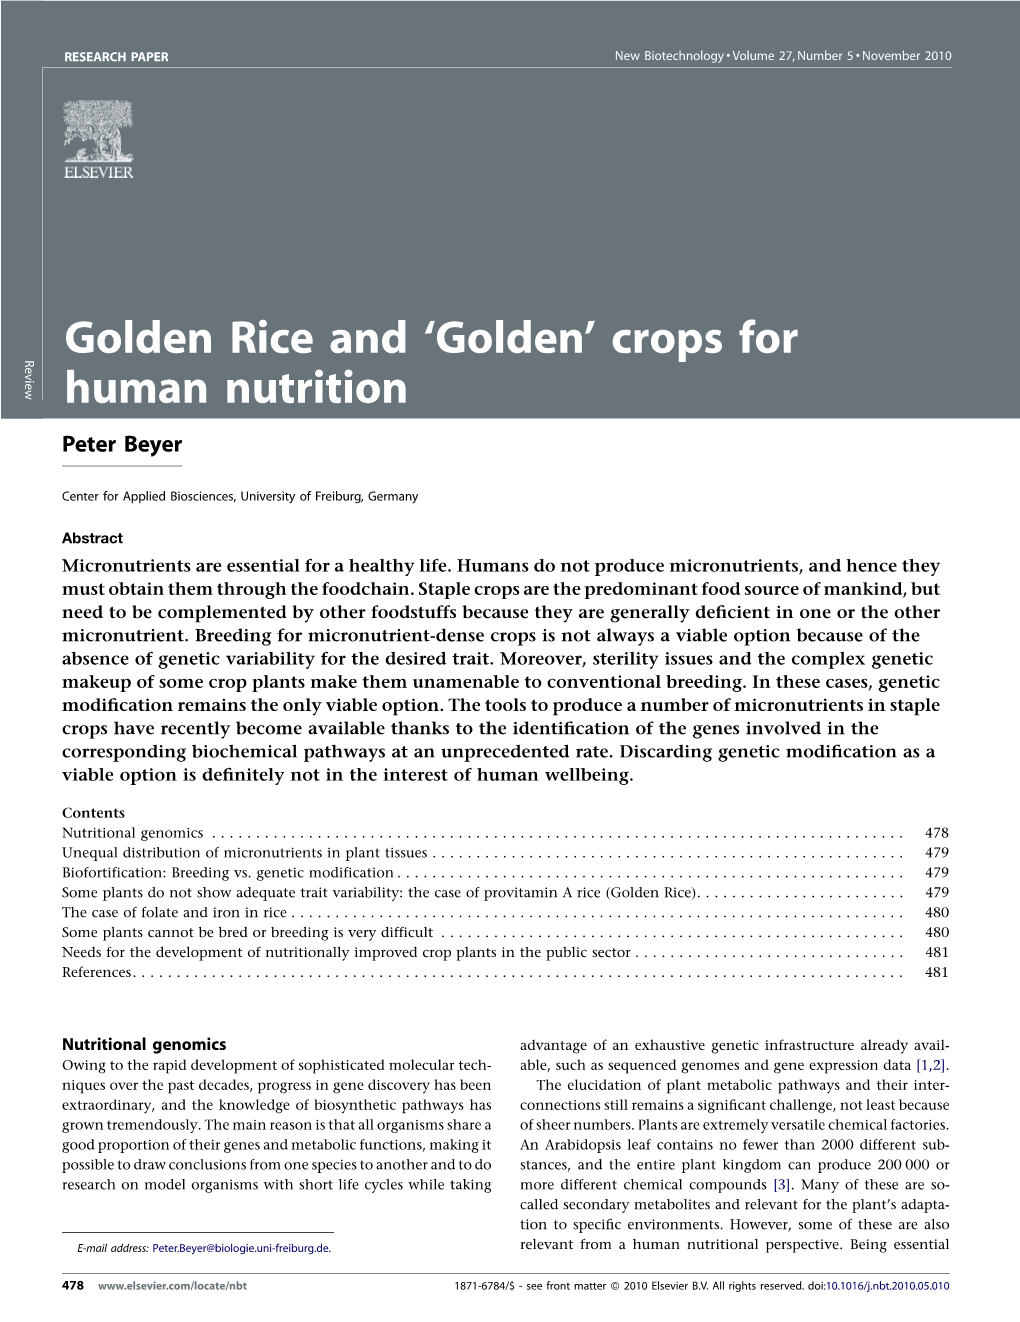 Golden Rice and 'Golden' Crops for Human Nutrition